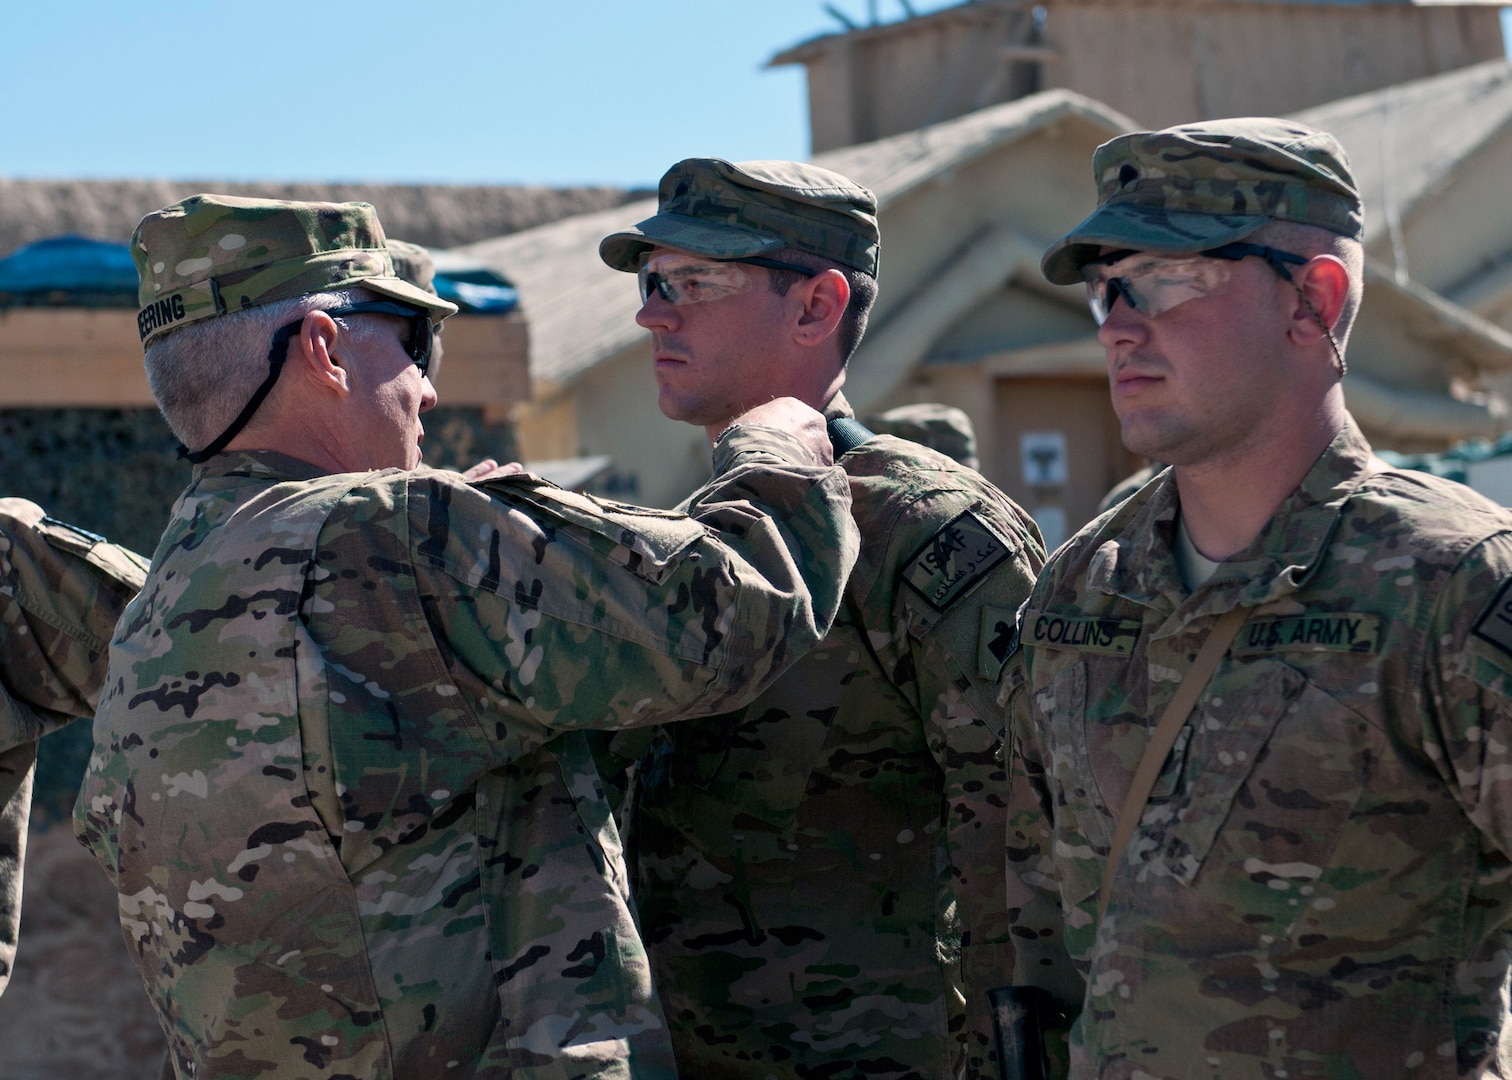 Army Maj. Gen. Myles Deering, adjutant general of Oklahoma, awards the Combat Infantry Badge to Army Spc. Jason Barrow, a member of Headquarters Company, 1st Battalion, 279th Infantry, 45th Infantry Brigade Combat Team during his visit Oct. 14, 2011.